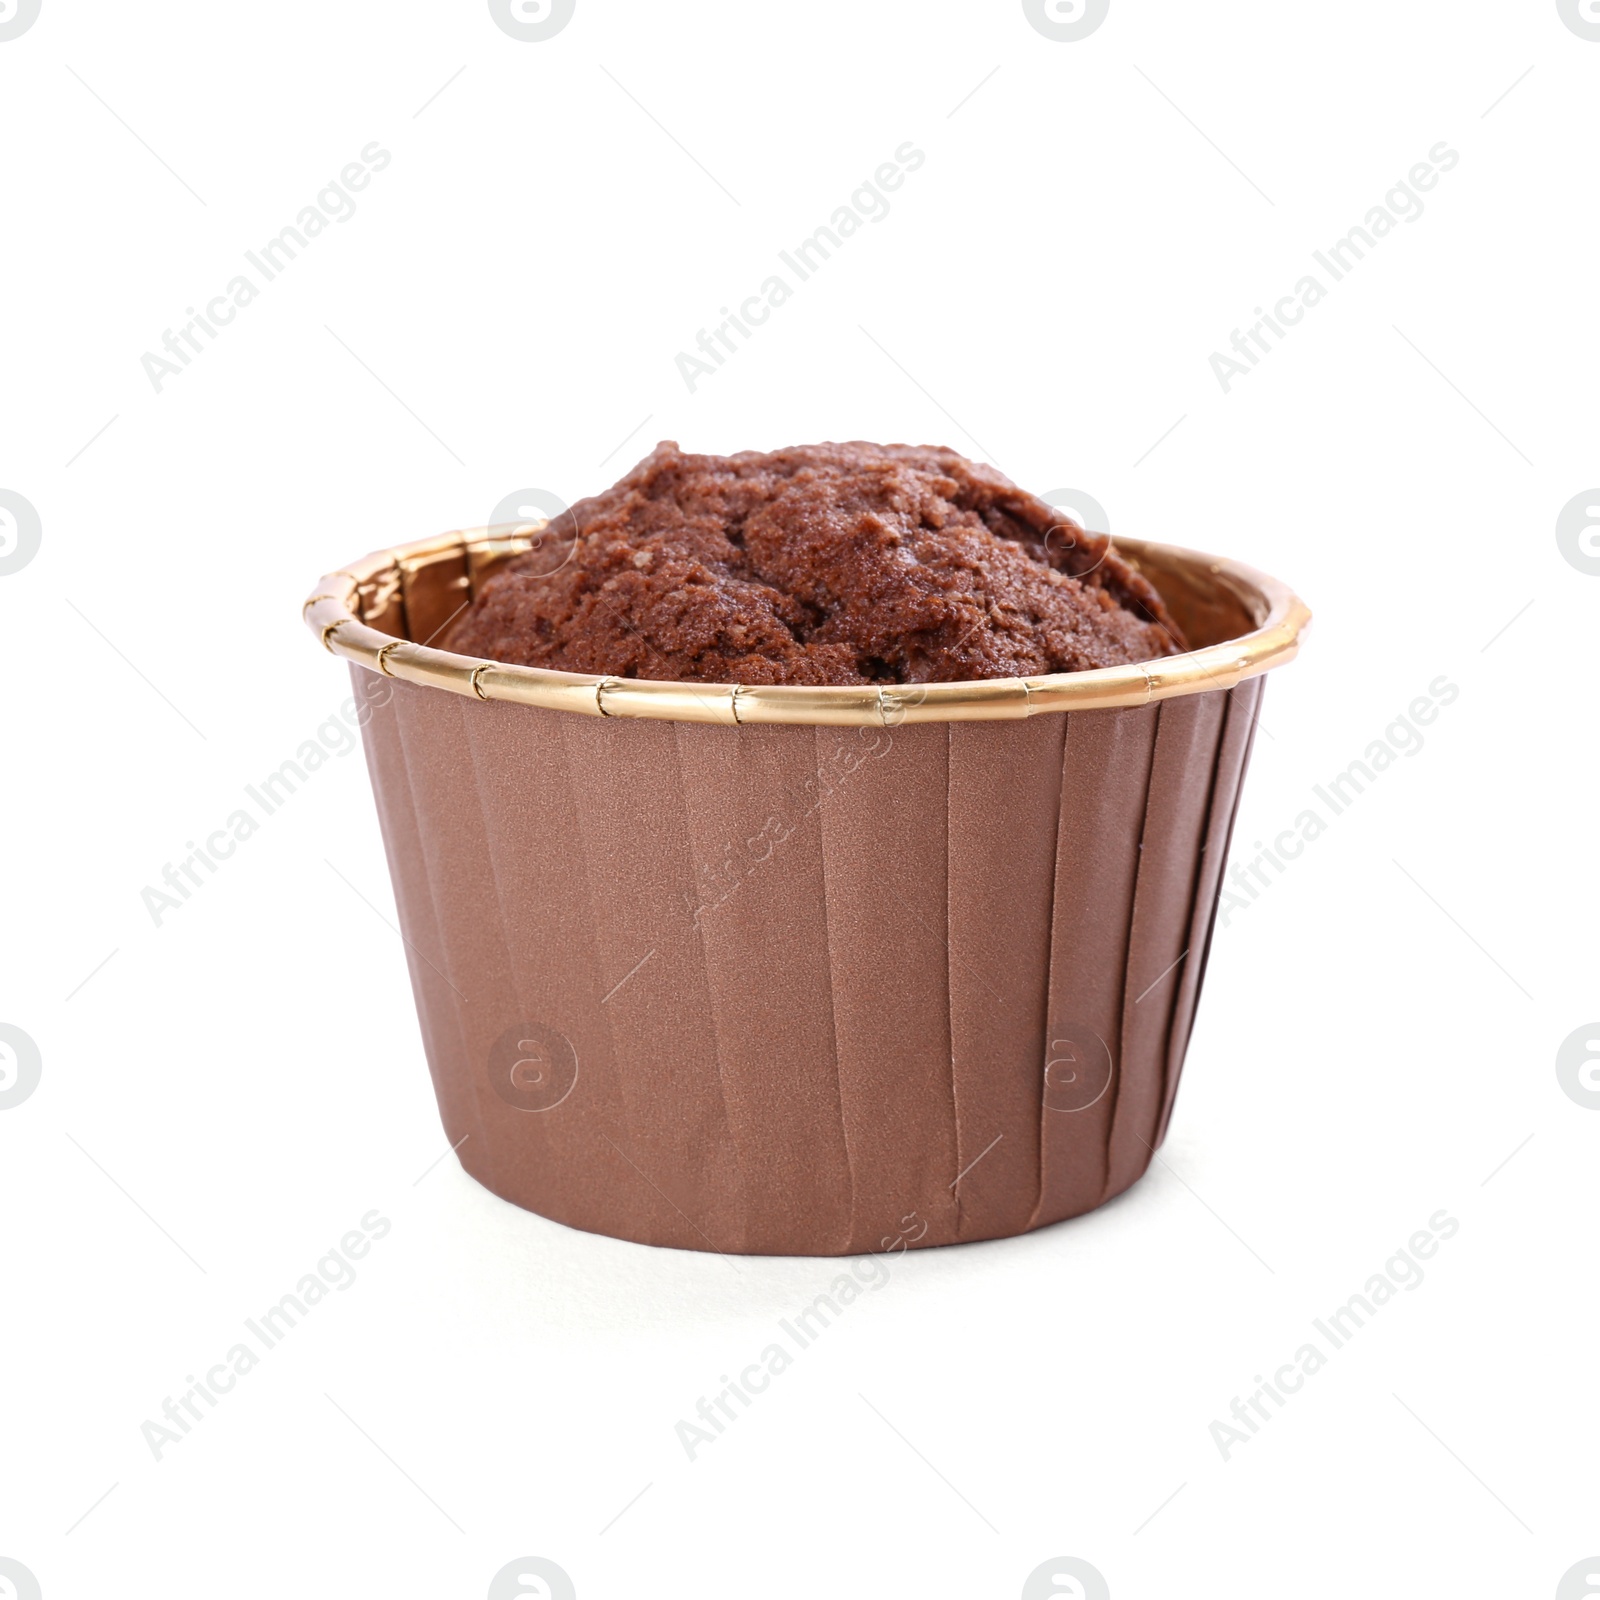 Photo of One delicious chocolate cupcake isolated on white